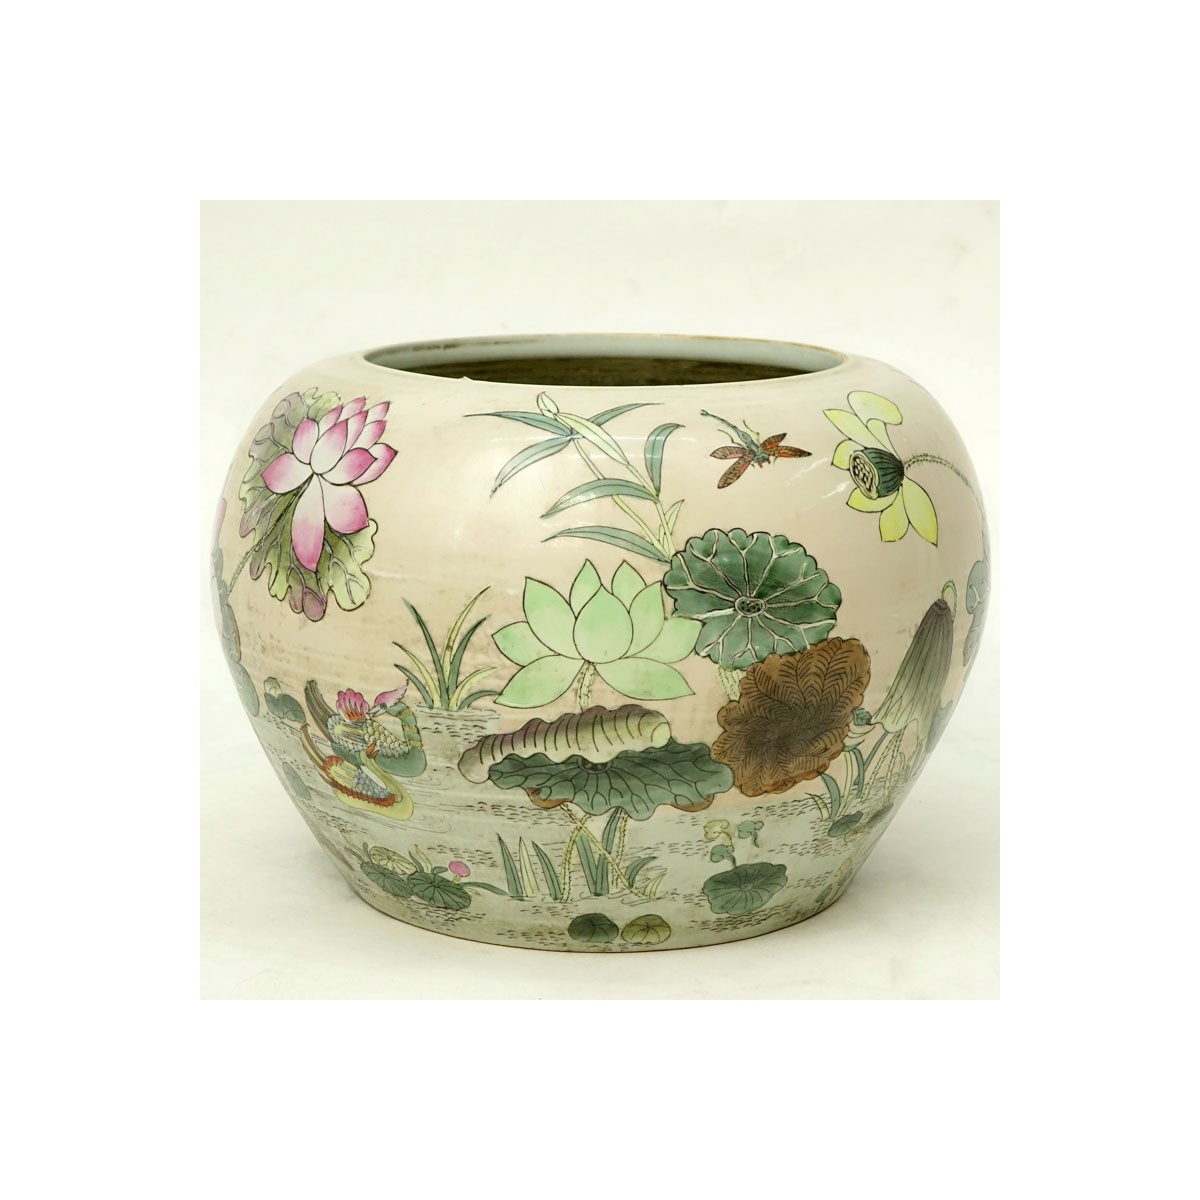 20th Century Chinese  Porcelain Jardinière. Depicts a enamel floral painted pond scene with water l